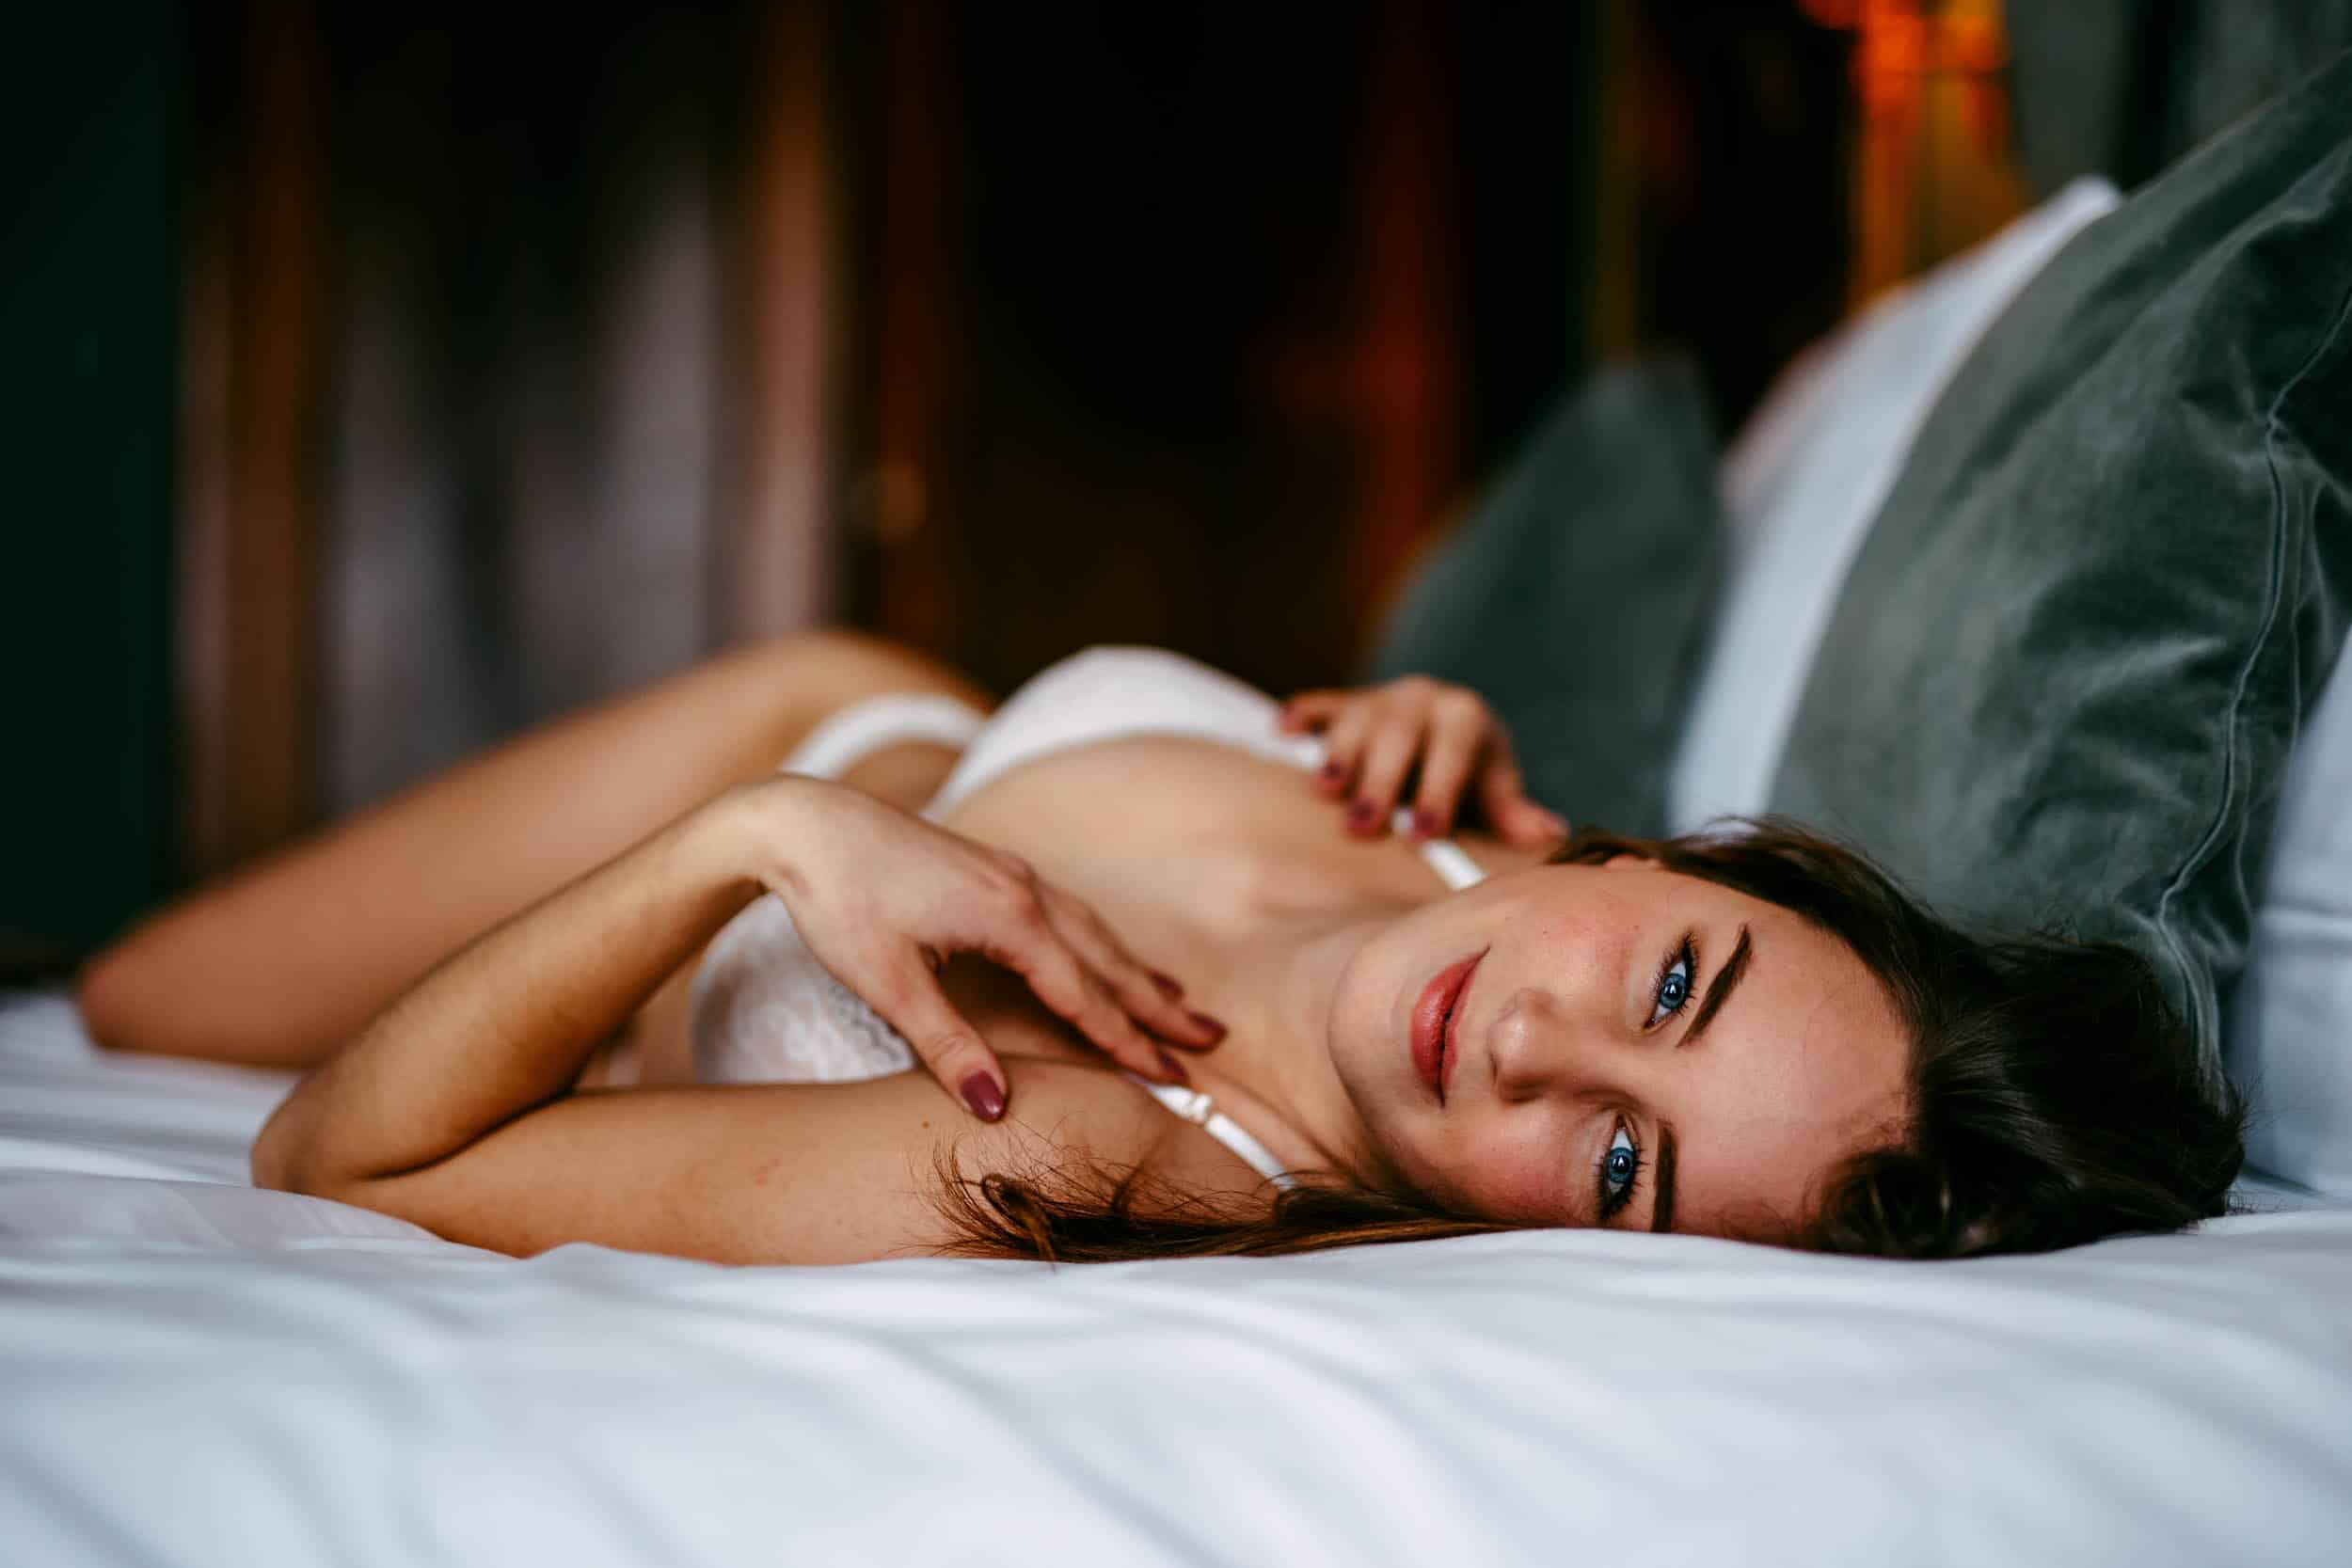 A beautiful woman, lying elegantly on a boudoir bed in enchanting lingerie.